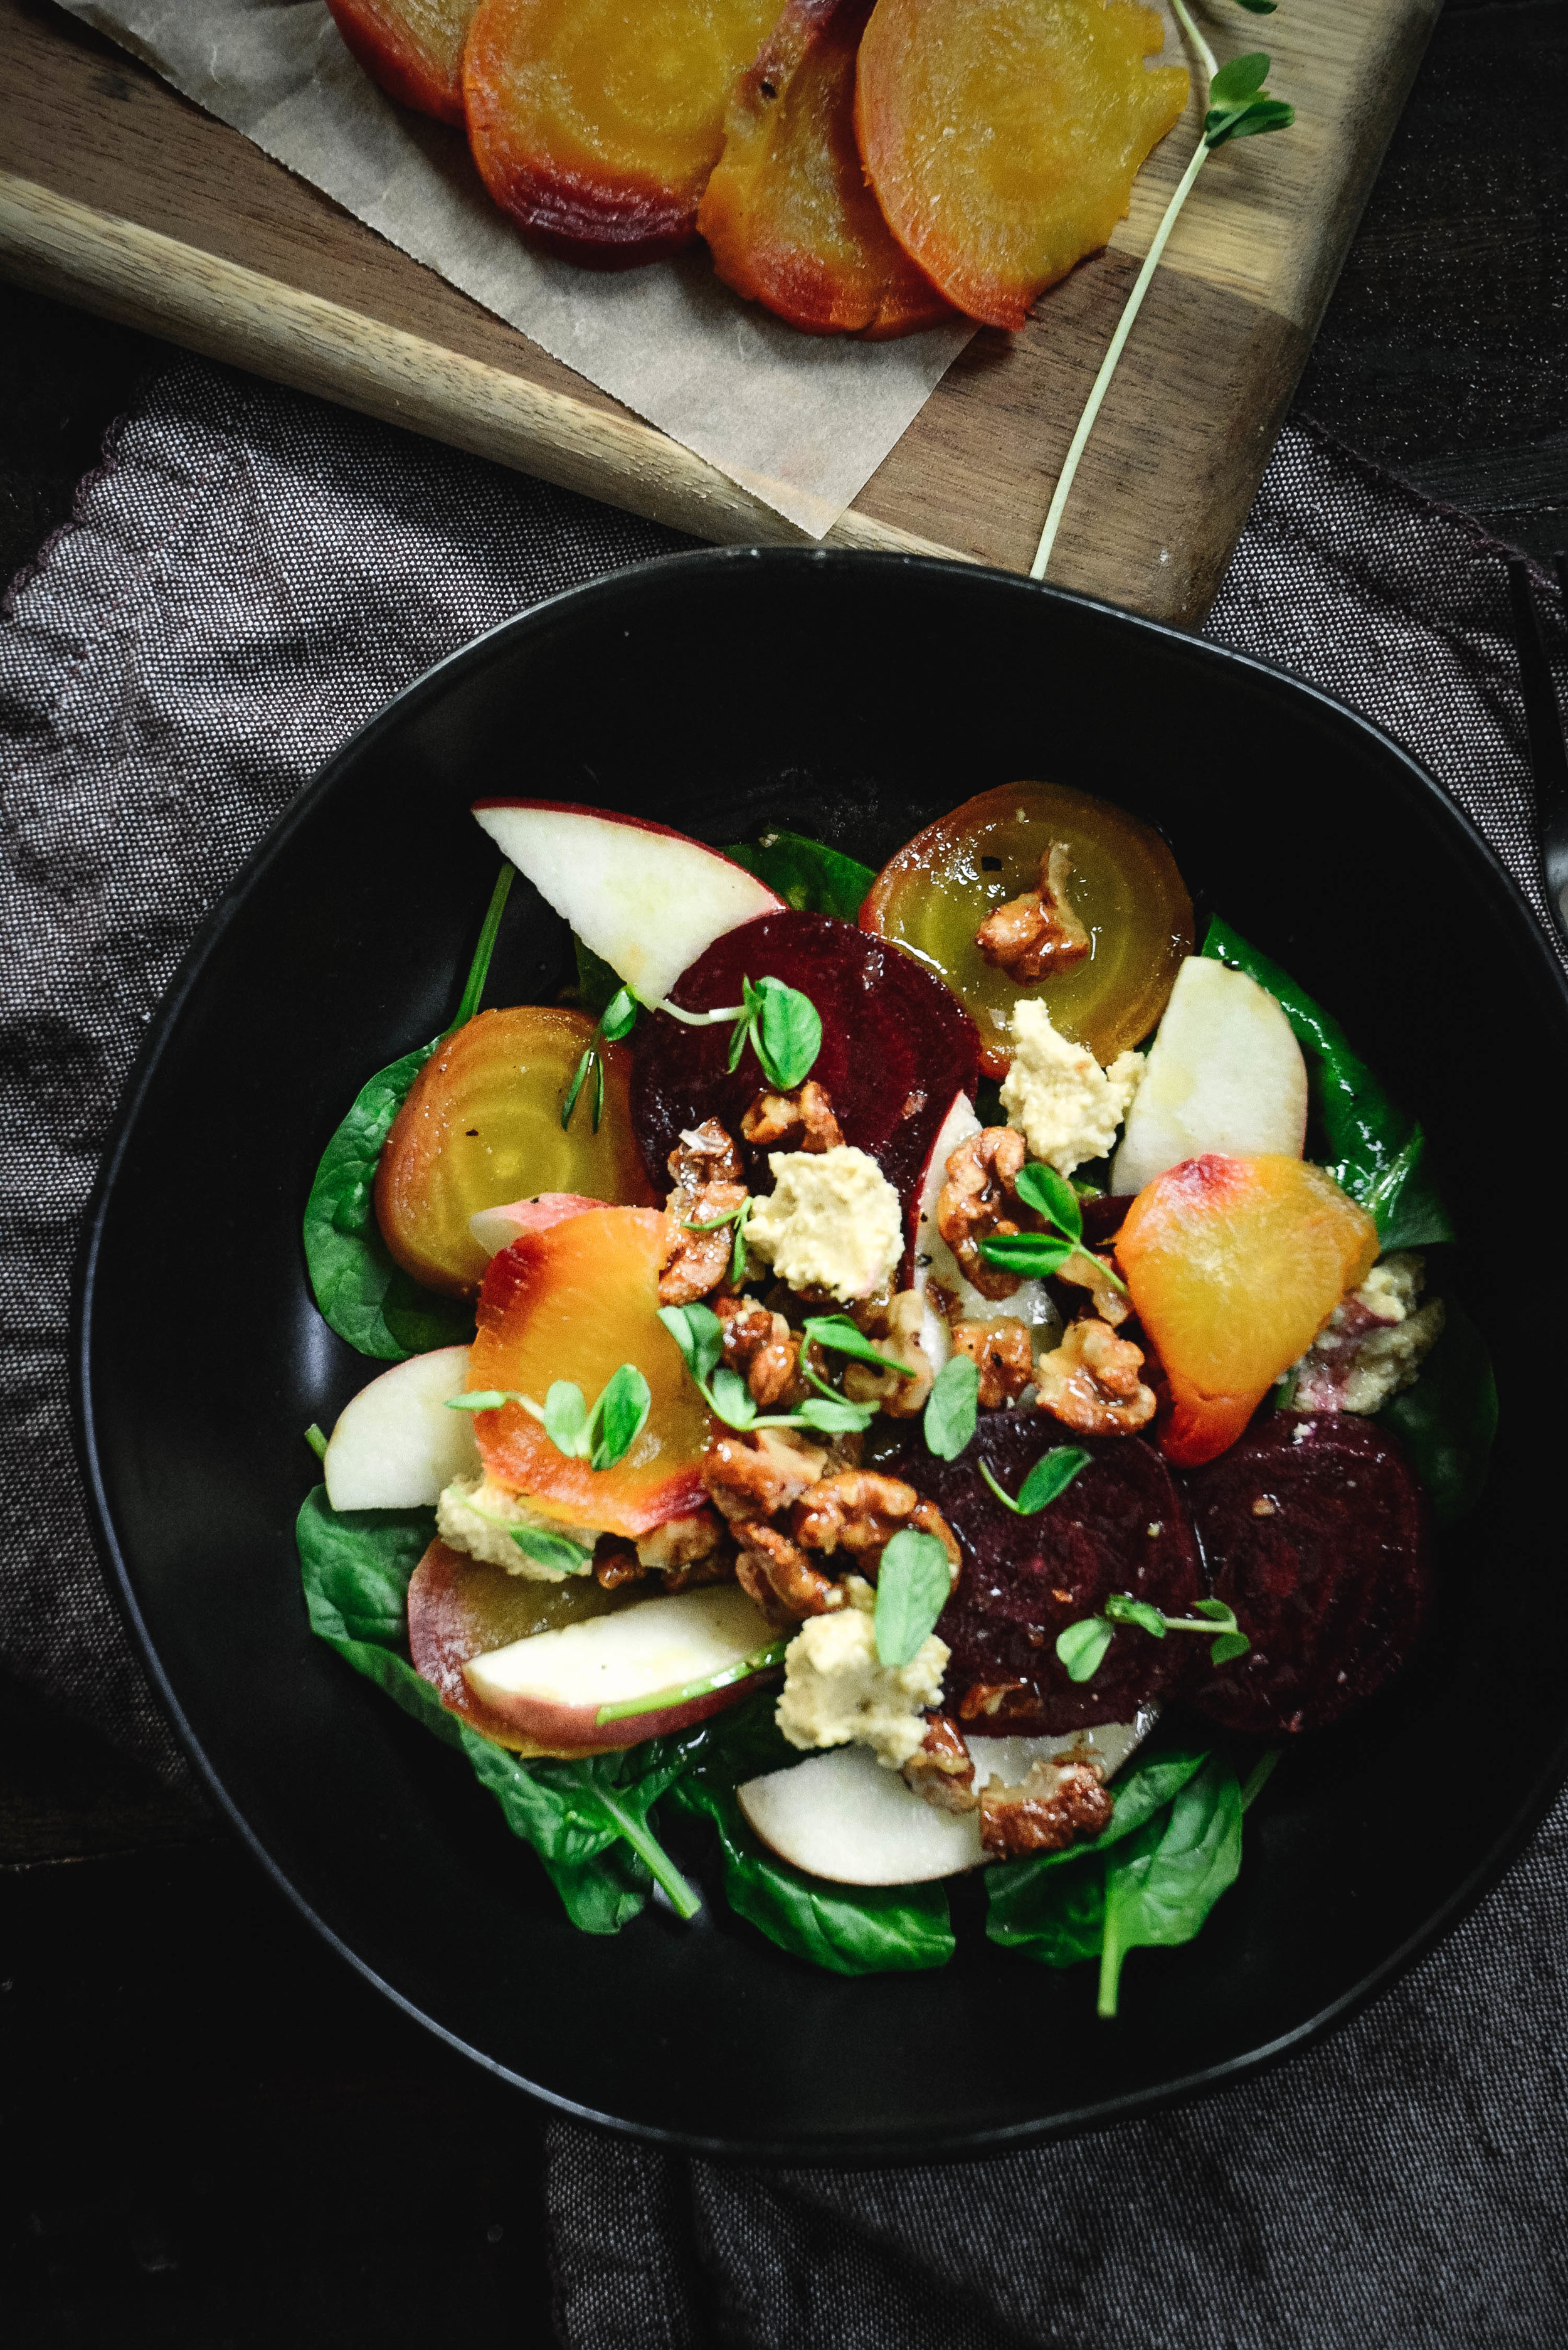  Make your tastebuds happy with this delicious and hearty roasted beet salad with apple, candied walnuts and cashew cheese. It's a fantastic combination that won't disappoint. If you're whole 30, you can still make this by simply using regular walnuts instead of candied. #salad, #fall, #beets, #apple, #calmeats, #vegan, #cashewcheese, #paleo, #whole30, #realfood, #glutenfree, #dairyfree, #dairyfreecheese, #paleocheese 